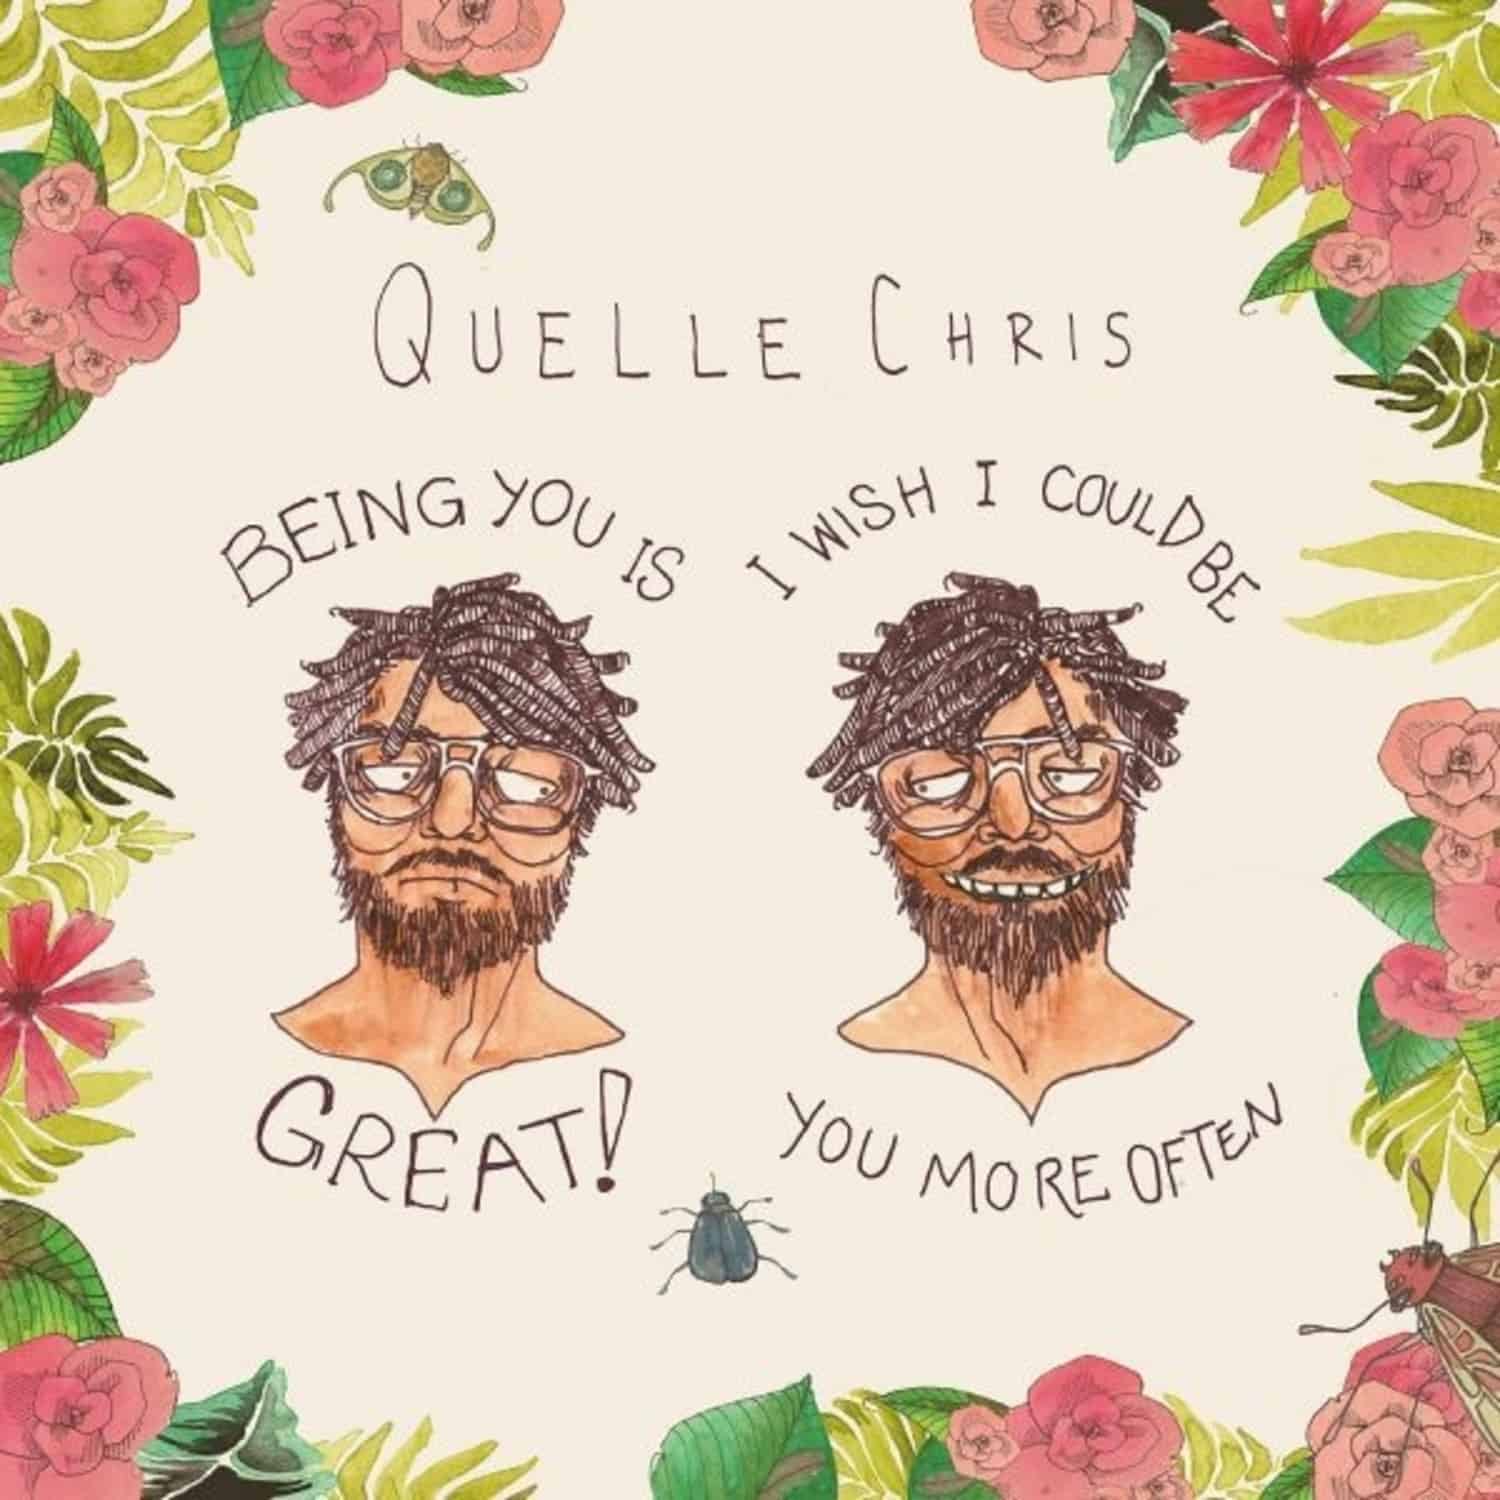 Quelle Chris - BEING YOU IS GREAT, I WISH I COULD BE YOU MORE OFT 